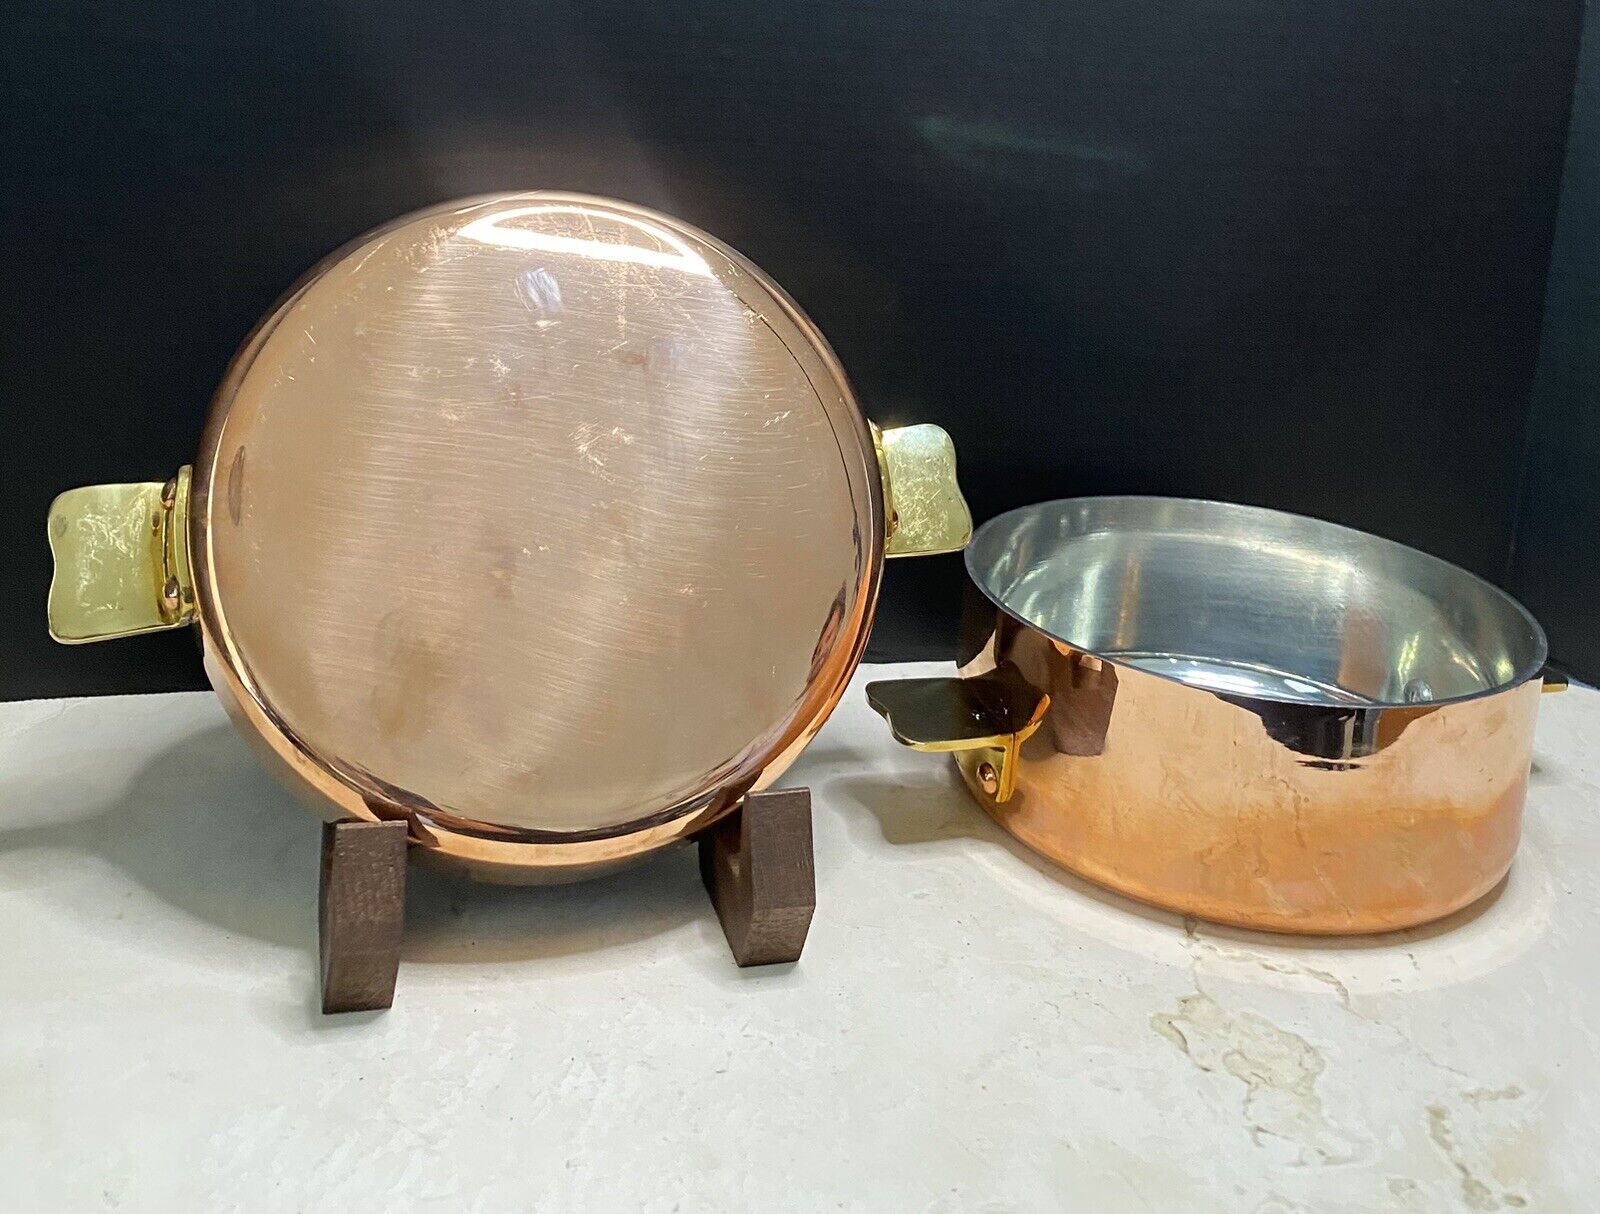 VERY HEAVY - Vintage 1960s French Copper Pommes Anna 